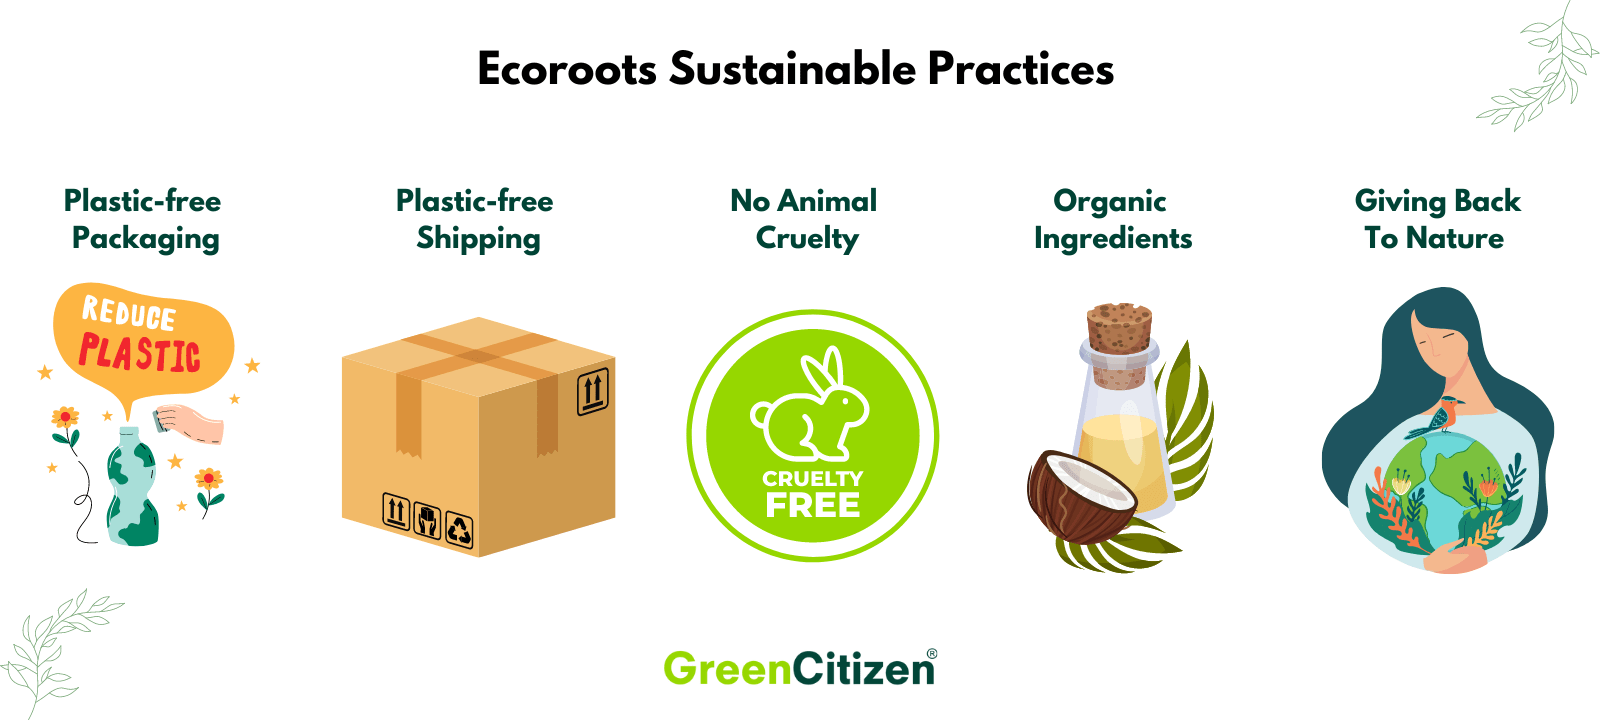 Ecoroots Sustainable Practices